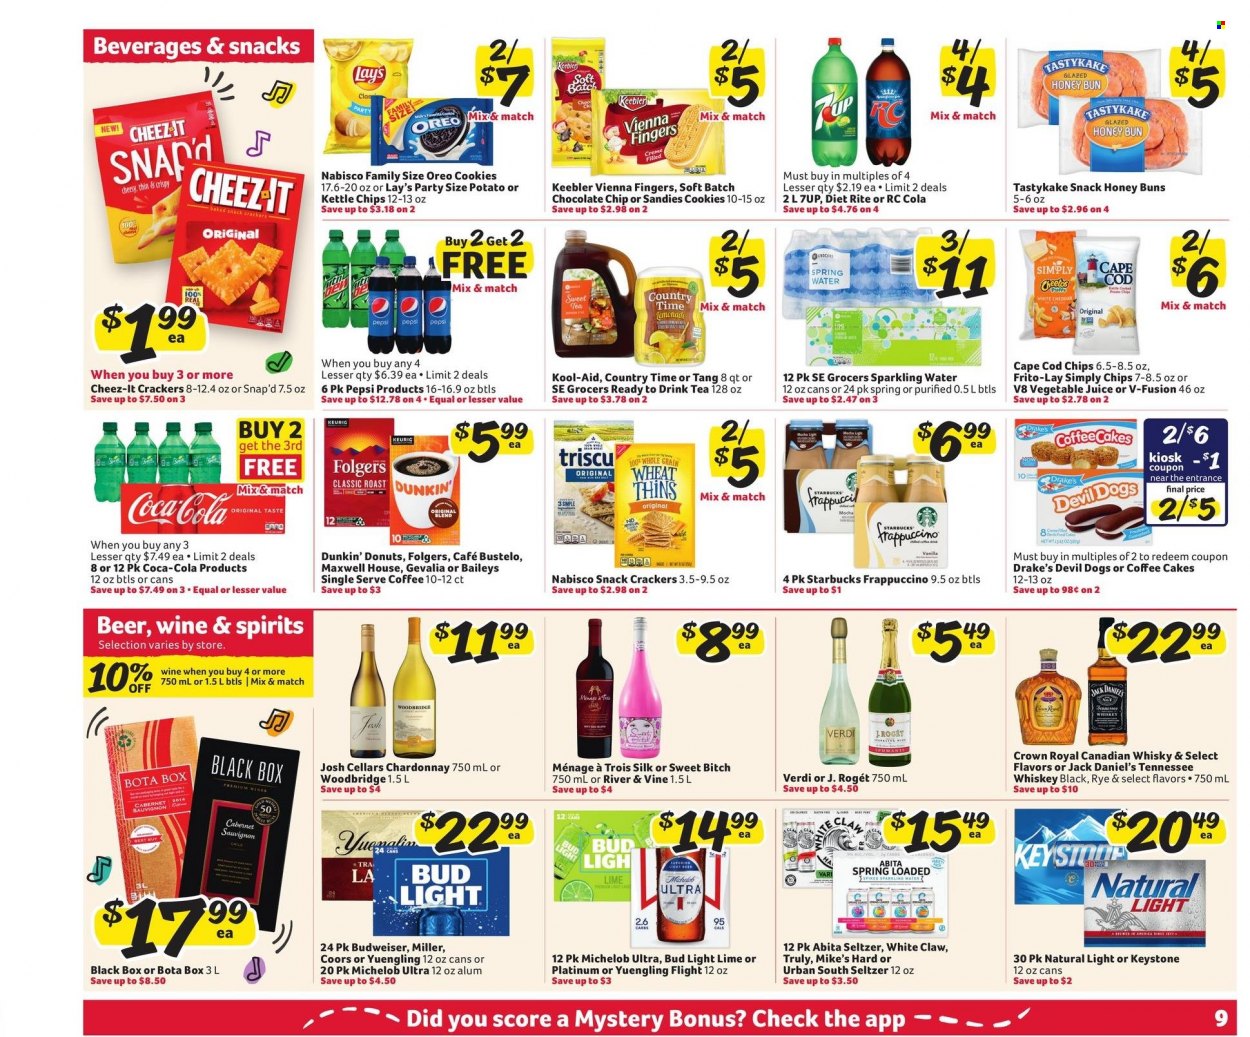 thumbnail - Winn Dixie Flyer - 01/12/2022 - 01/18/2022 - Sales products - cake, buns, donut, coffee cake, Dunkin' Donuts, cod, Jack Daniel's, cheese, Oreo, Silk, cookies, vienna fingers, snack, crackers, Keebler, chips, Lay’s, Thins, Frito-Lay, Cheez-It, Coca-Cola, Pepsi, juice, 7UP, vegetable juice, Country Time, seltzer water, spring water, sparkling water, Maxwell House, tea, Starbucks, Folgers, Gevalia, frappuccino, Keurig, Cabernet Sauvignon, red wine, white wine, Chardonnay, wine, Woodbridge, canadian whisky, Tennessee Whiskey, whiskey, Baileys, White Claw, TRULY, whisky, beer, Bud Light, Miller, Keystone, Budweiser, Coors, Yuengling, Michelob. Page 11.